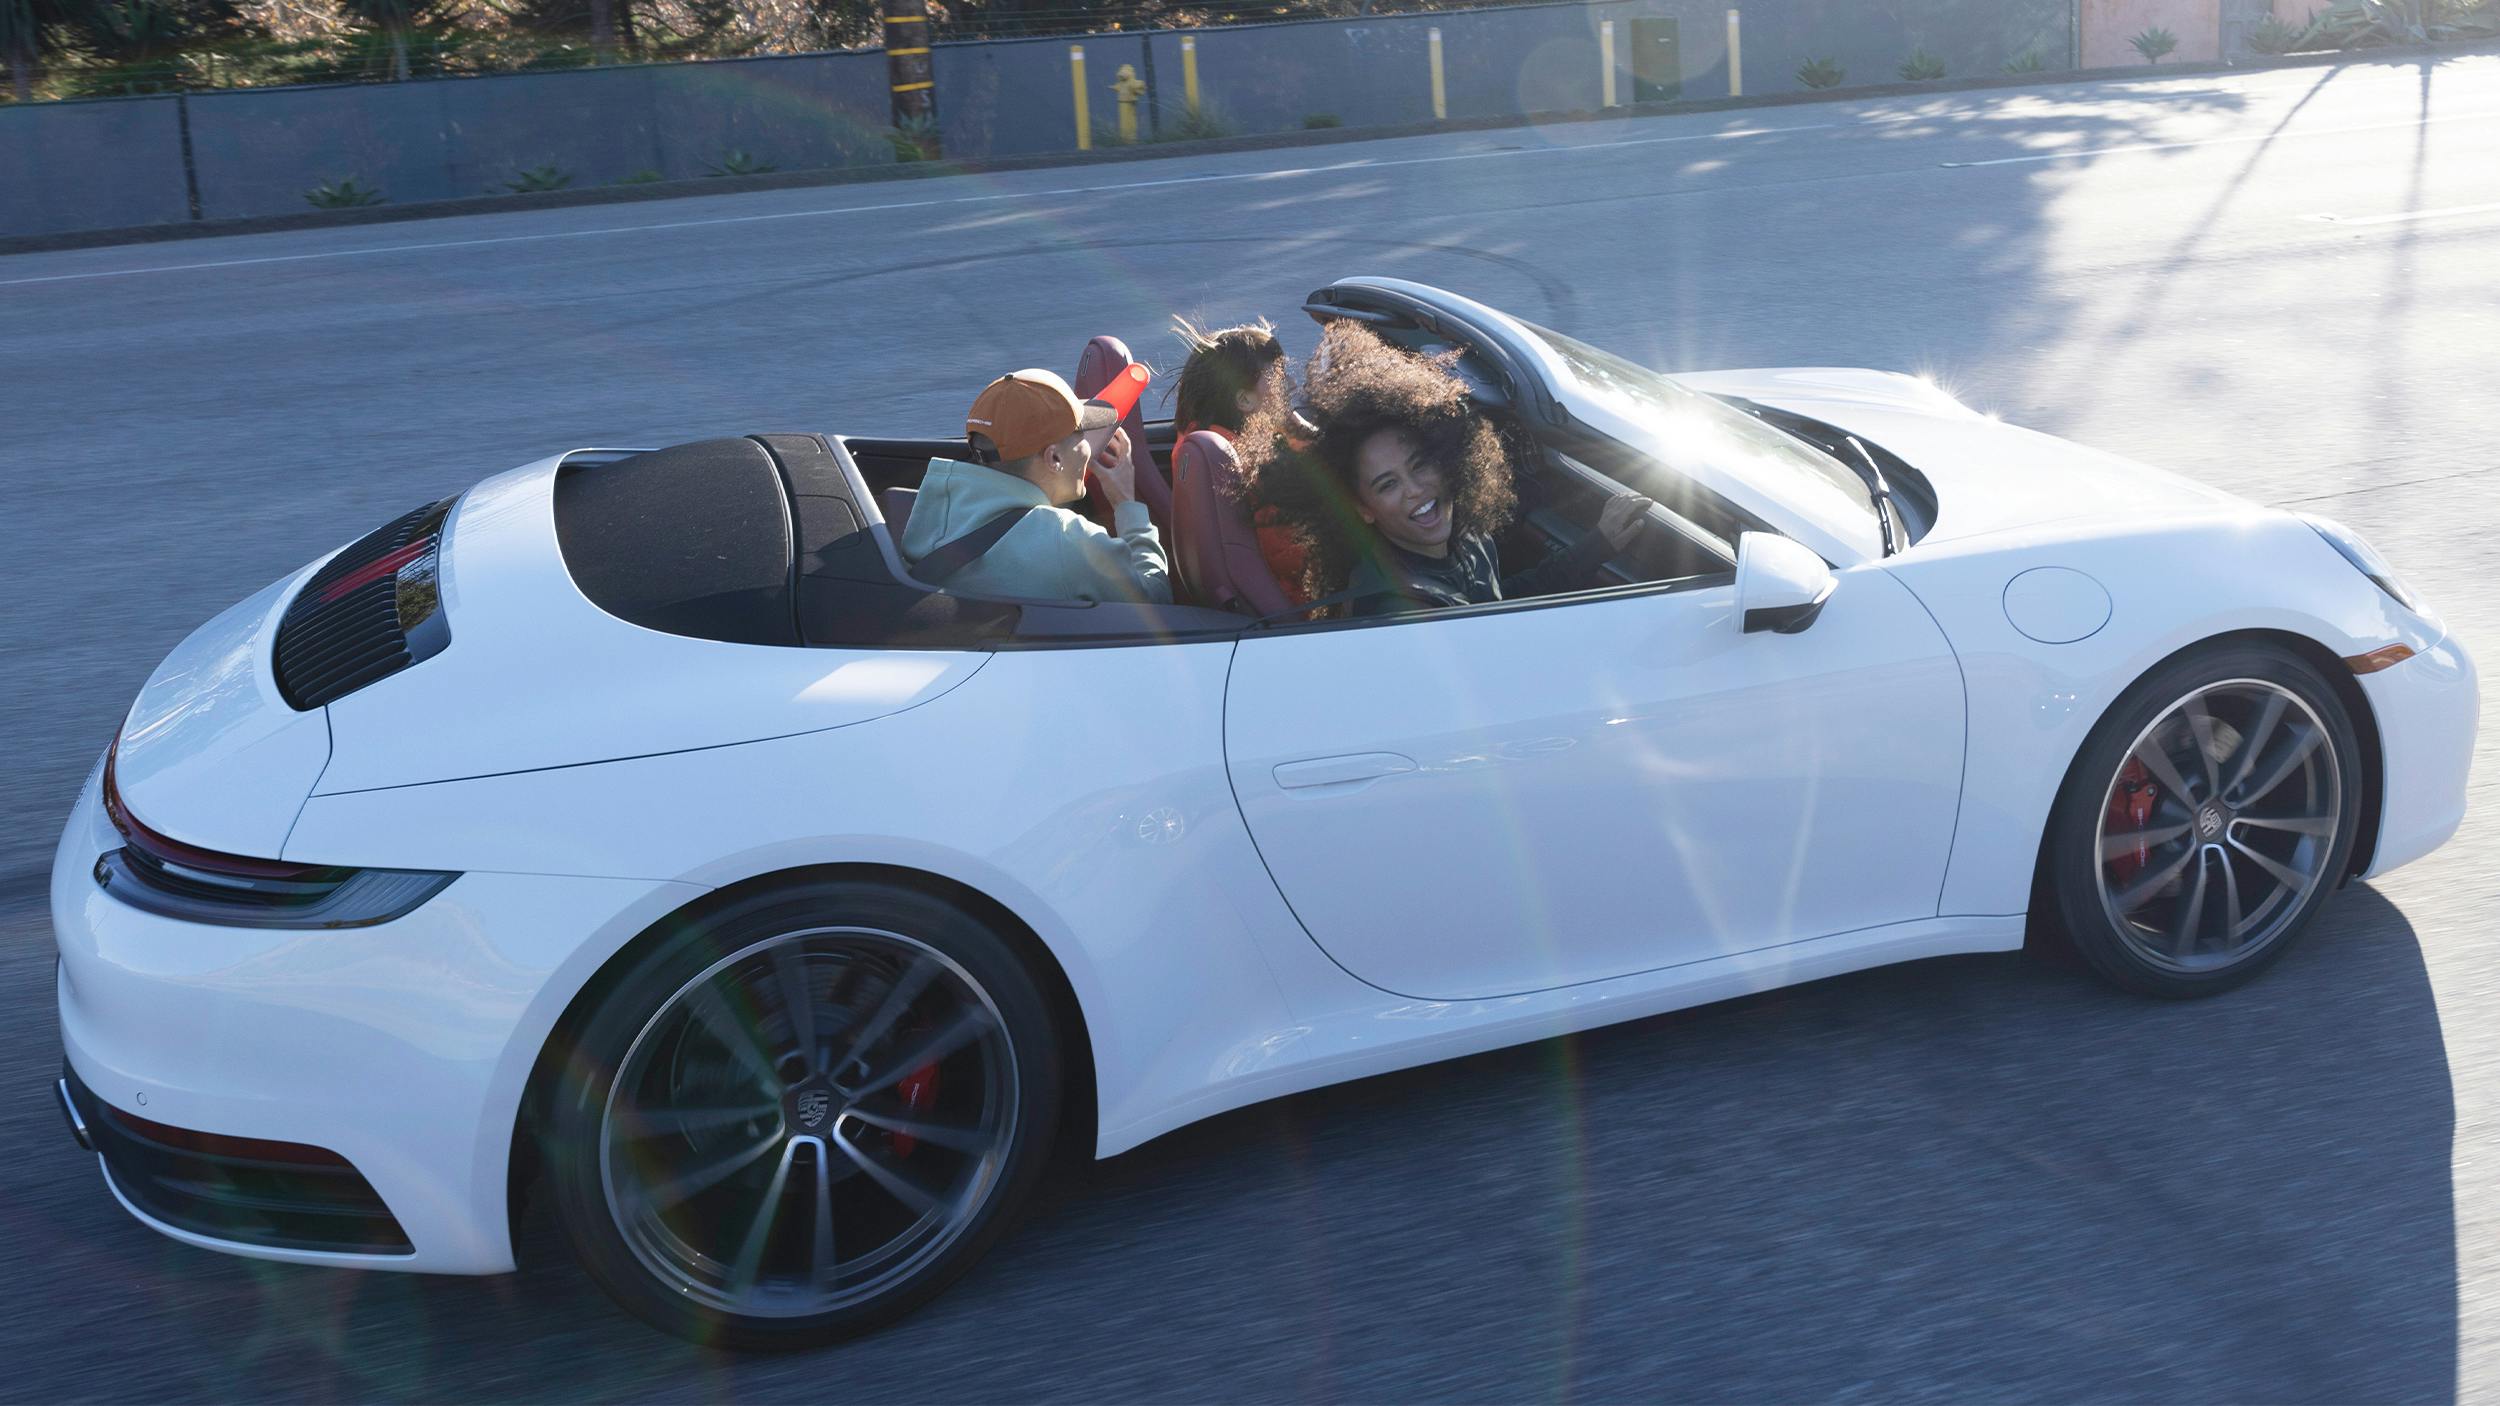 Three people riding in a convertible white Porsche 911